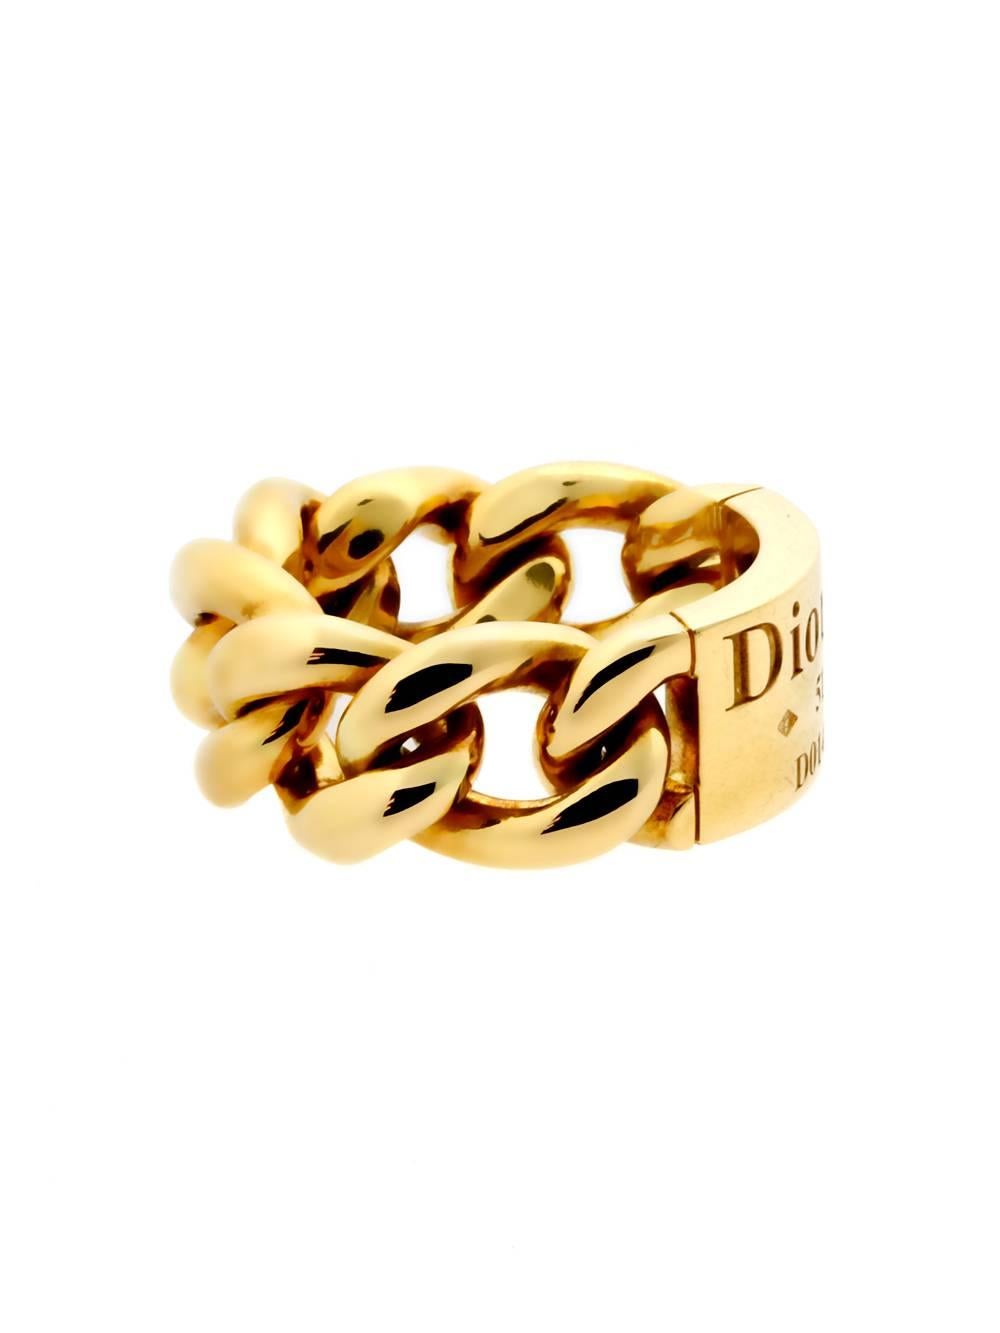 Christian Dior gold “Gourmette” featuring an engraved plaque encircled by a fabulous chunky gold chain-link band. This chic ring screams fun and can be worn with any outfit!

Made of 18k Yellow Gold
Hallmarks: Dior, 750, 51, Unique Serial